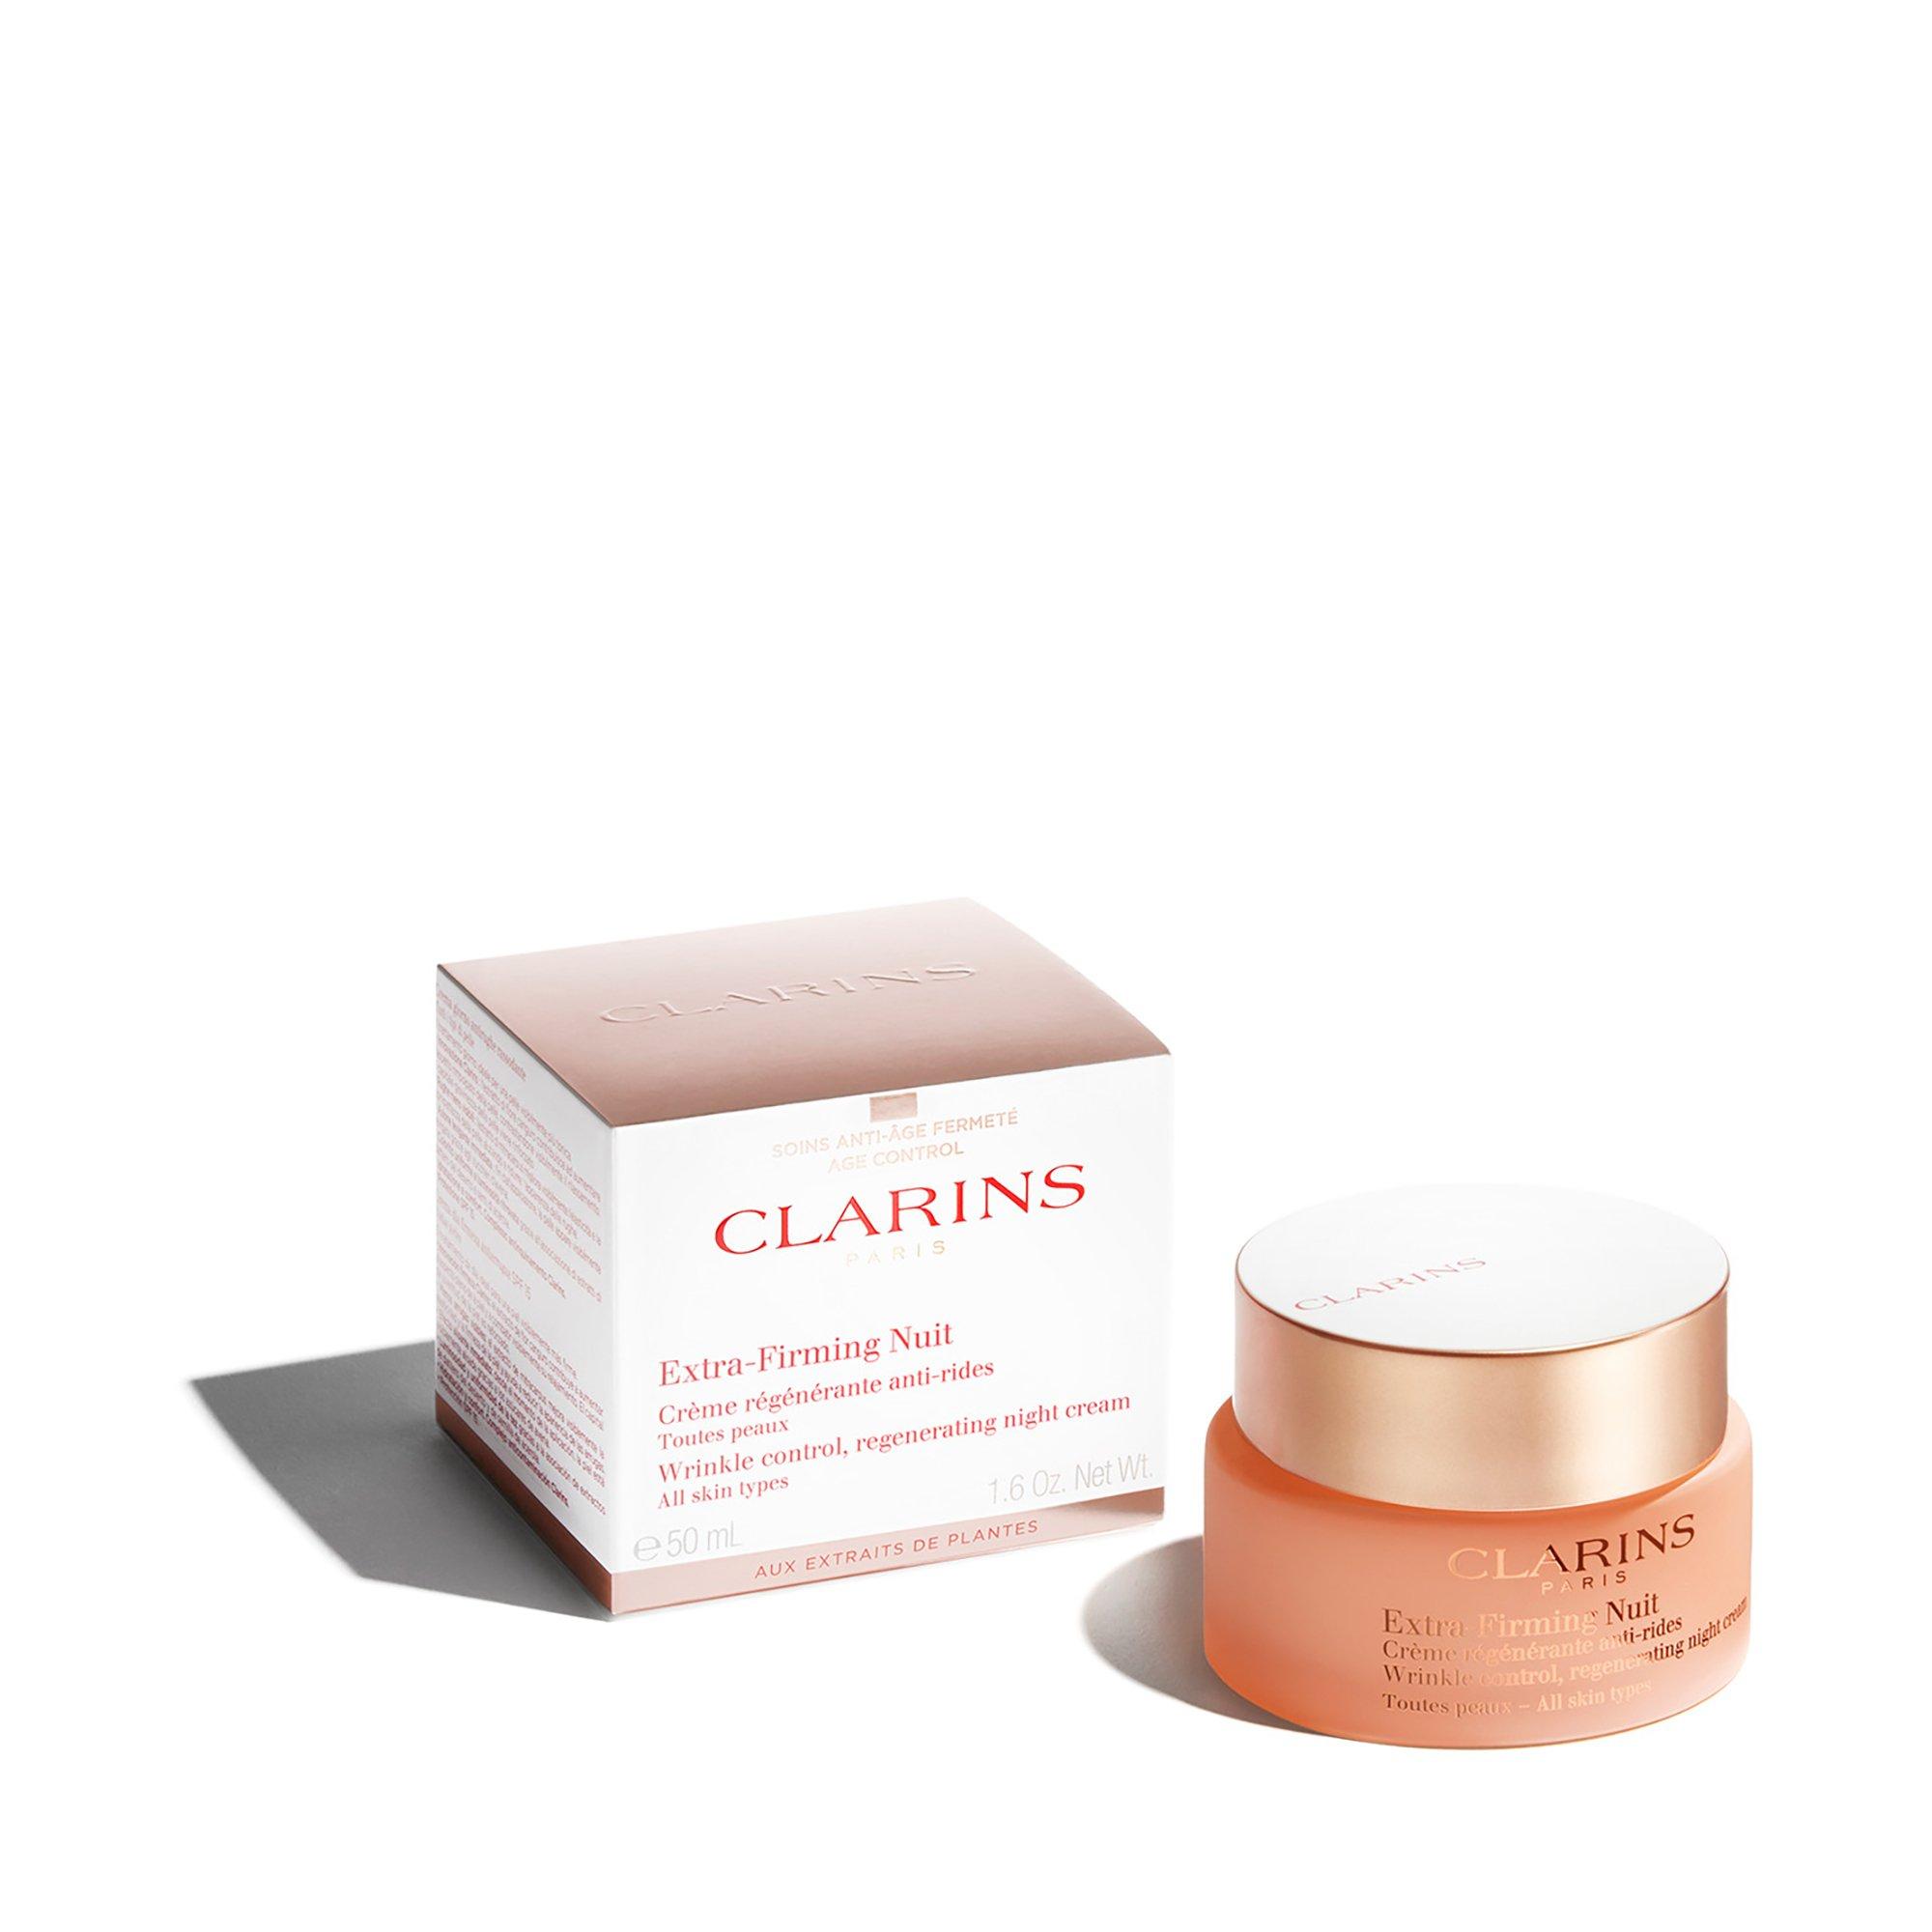 Image of CLARINS Extra-Firming Nuit - 50ml